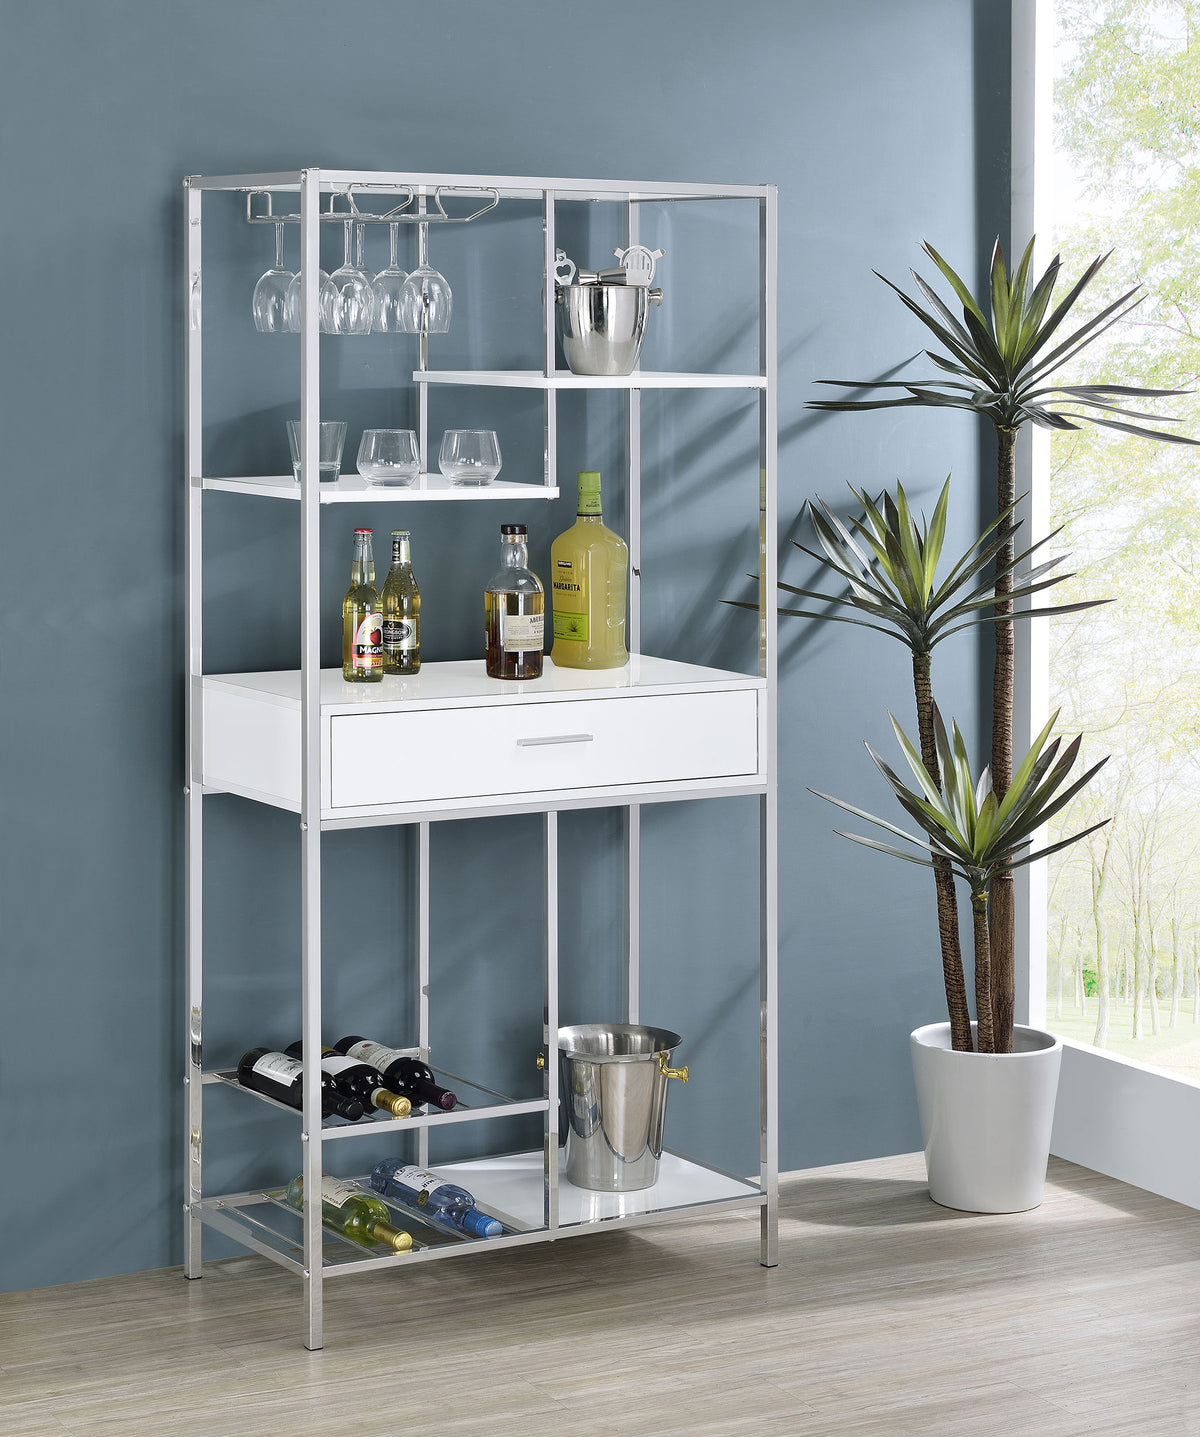 Figueroa 5-shelf Wine Cabinet with Storage Drawer White High Gloss and Chrome  Las Vegas Furniture Stores